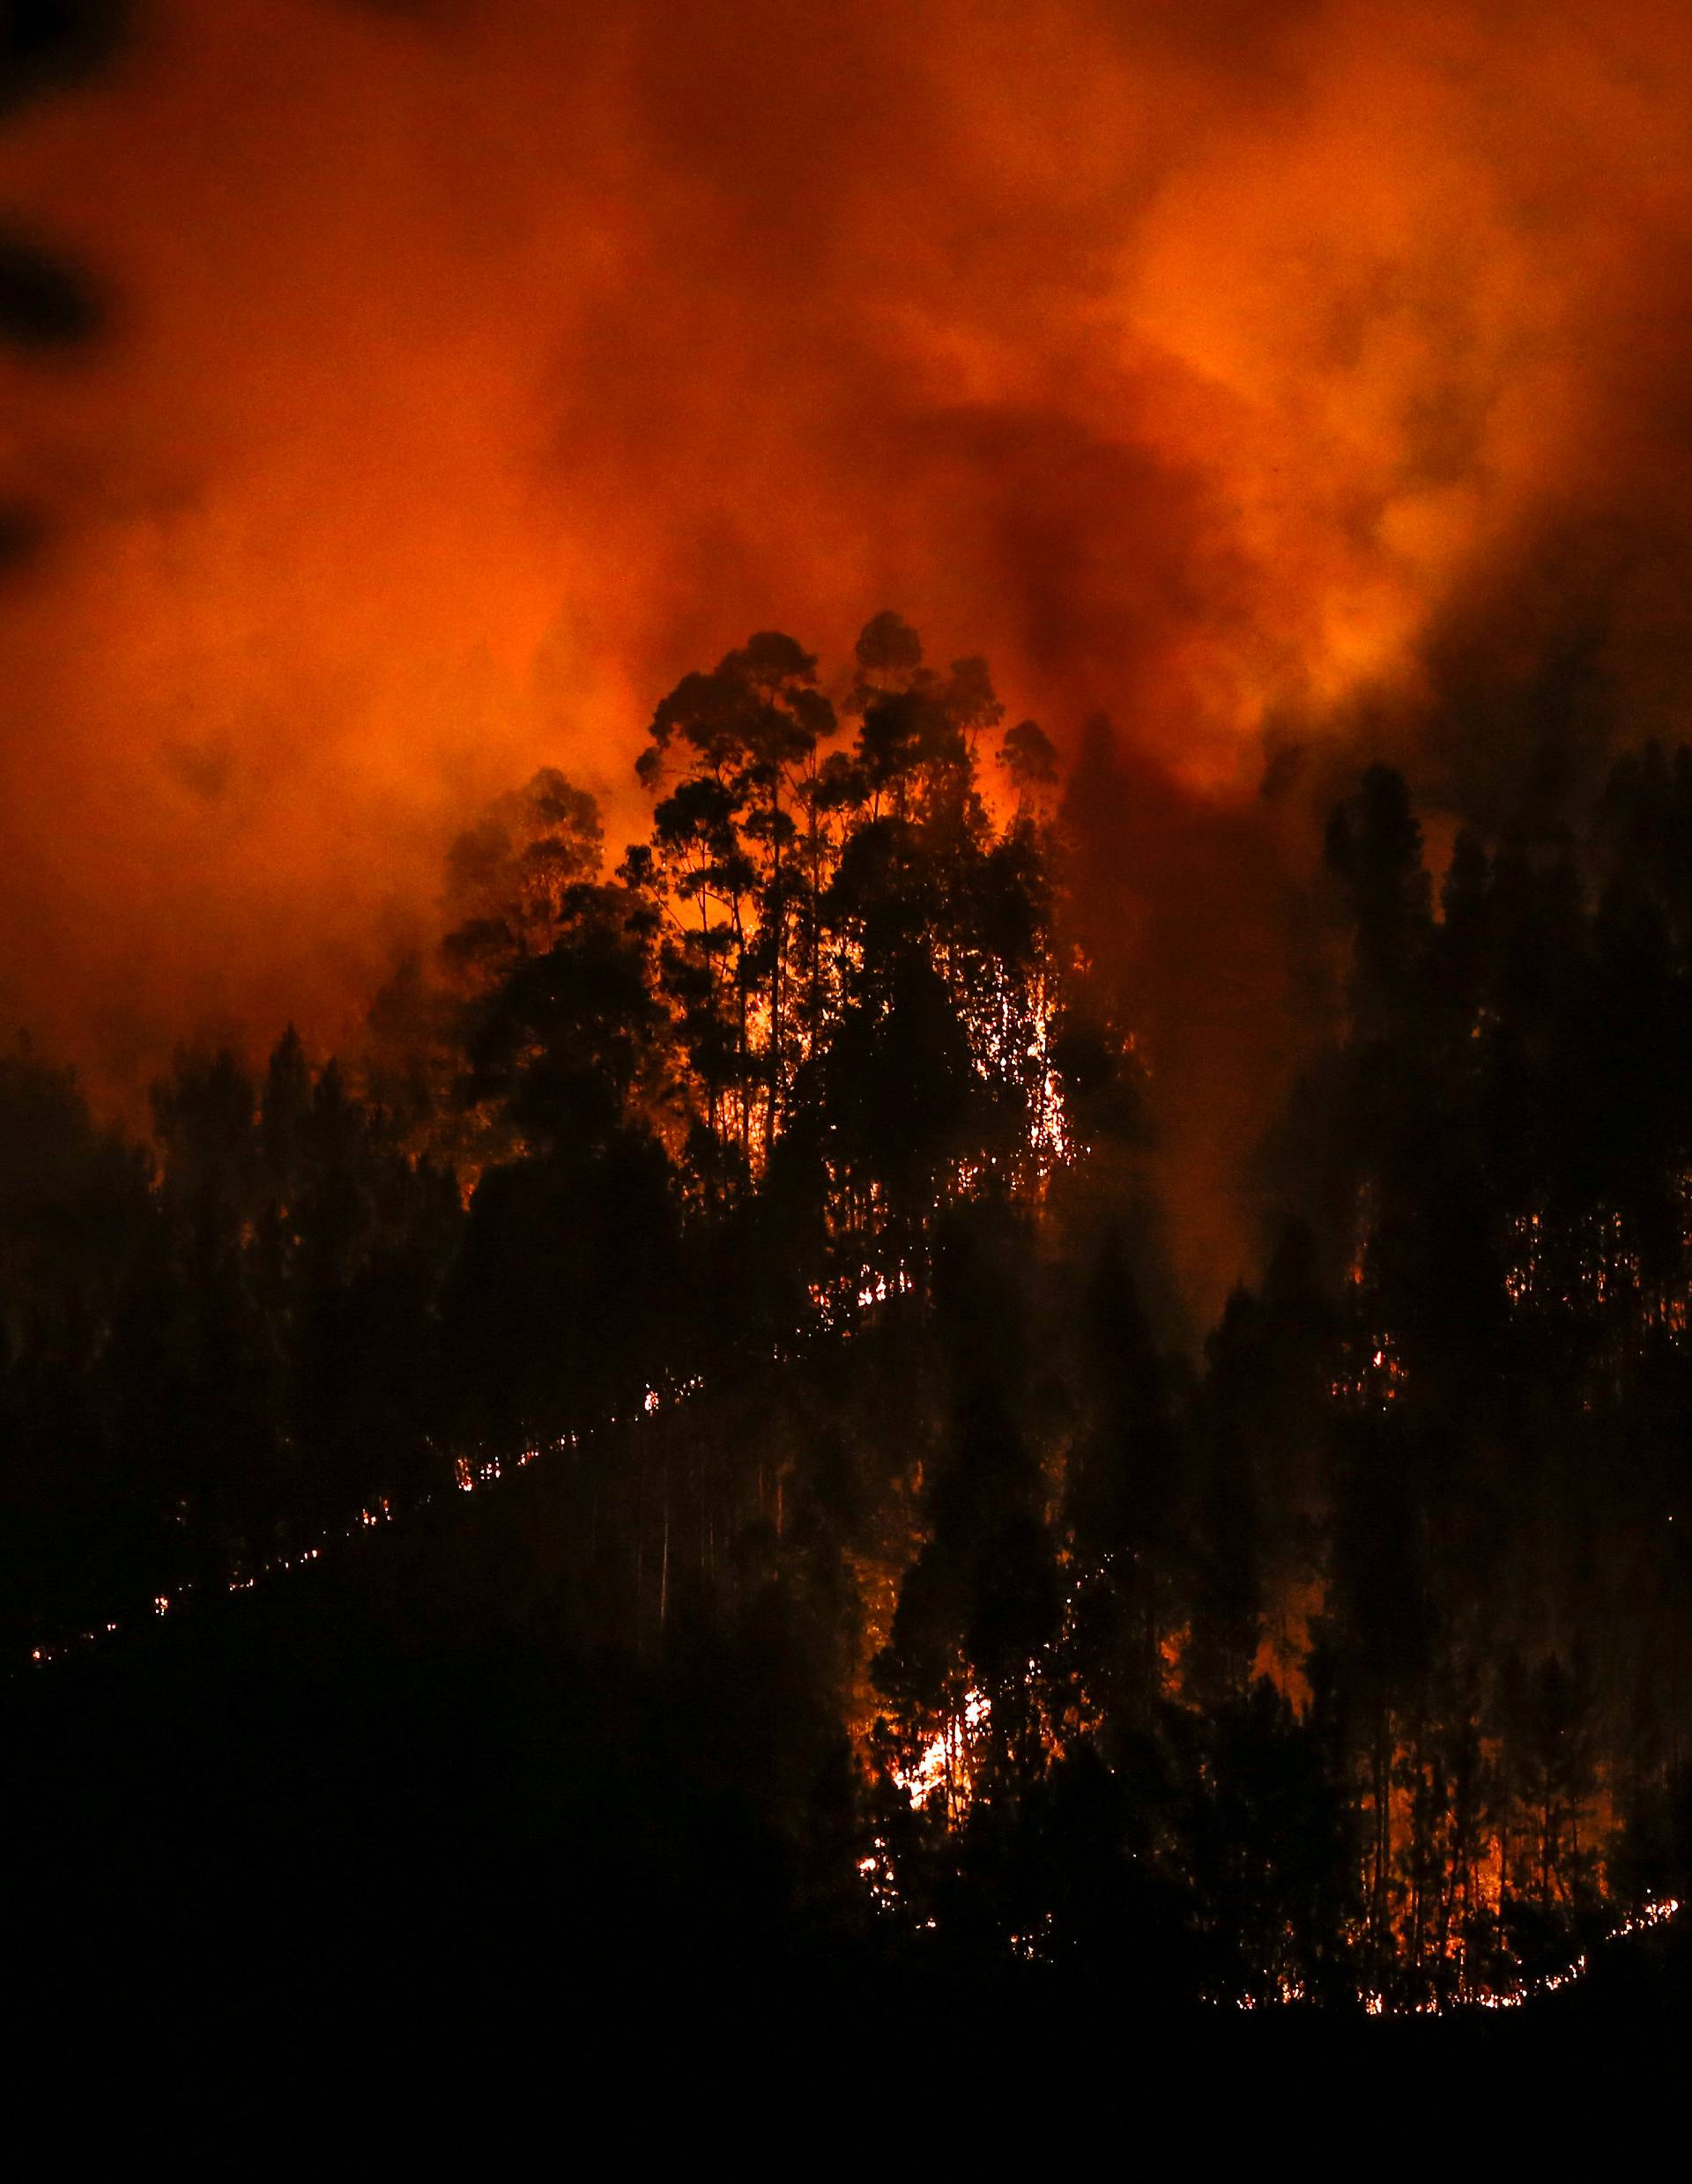 Smoke and flames from a forest fire are seen near Lousa